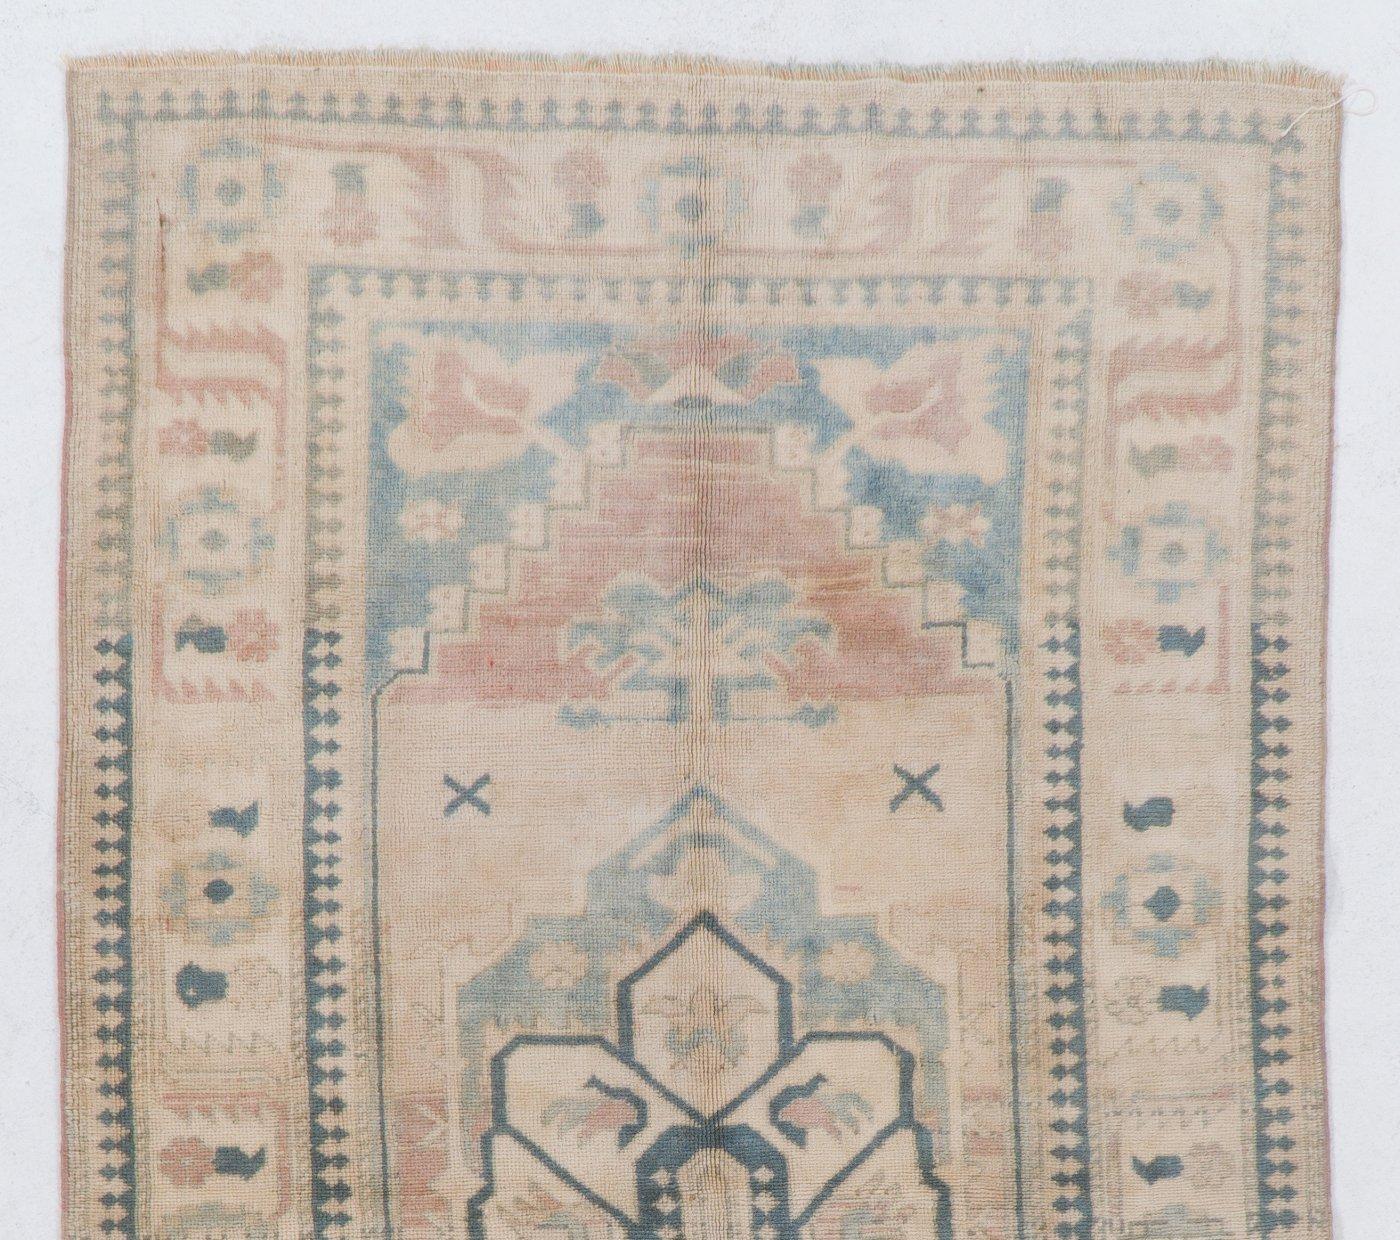 Hand-knotted vintage Turkish area rug with even medium wool pile on wool foundation and a design of a central geometric medallion and stylized florals and leaves in faded pink and blue colors. The rug is in very good condition, professionally